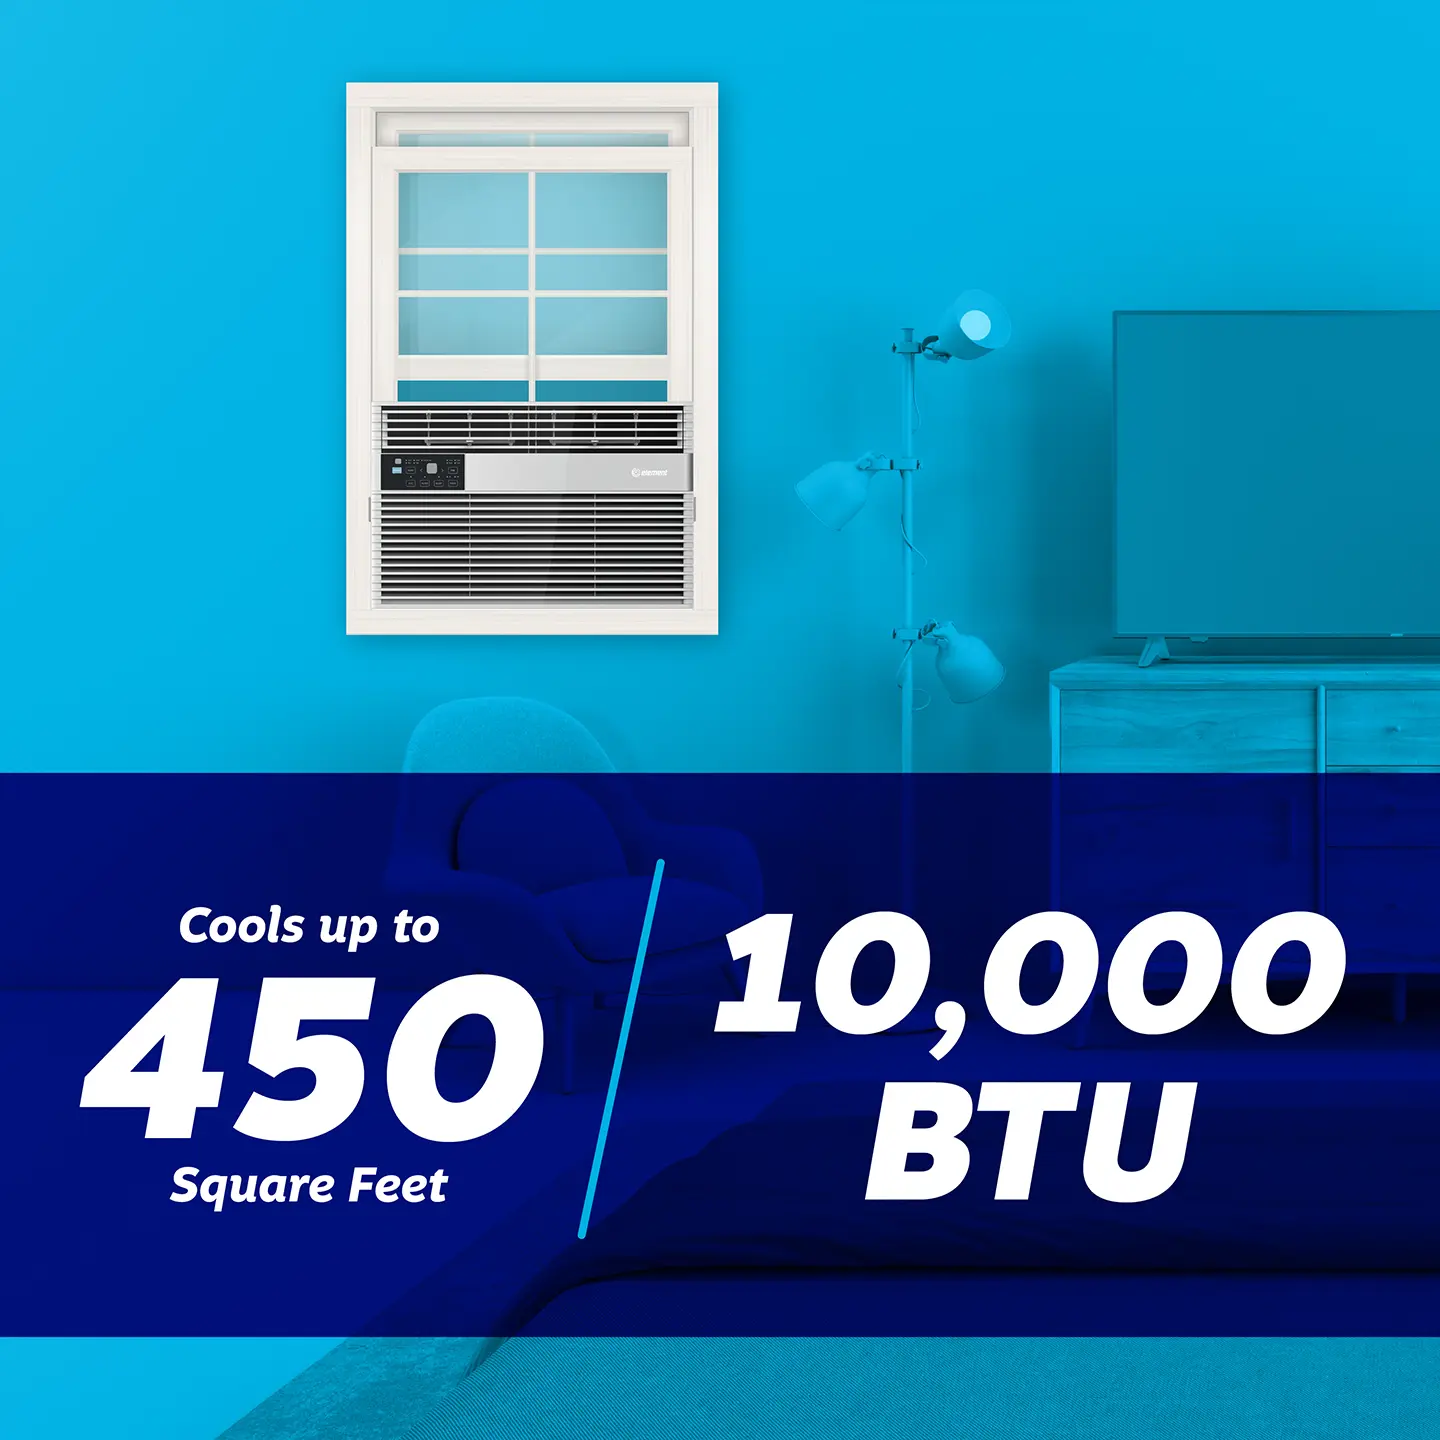 10000 BTU AC - cools up to 450 sq ft